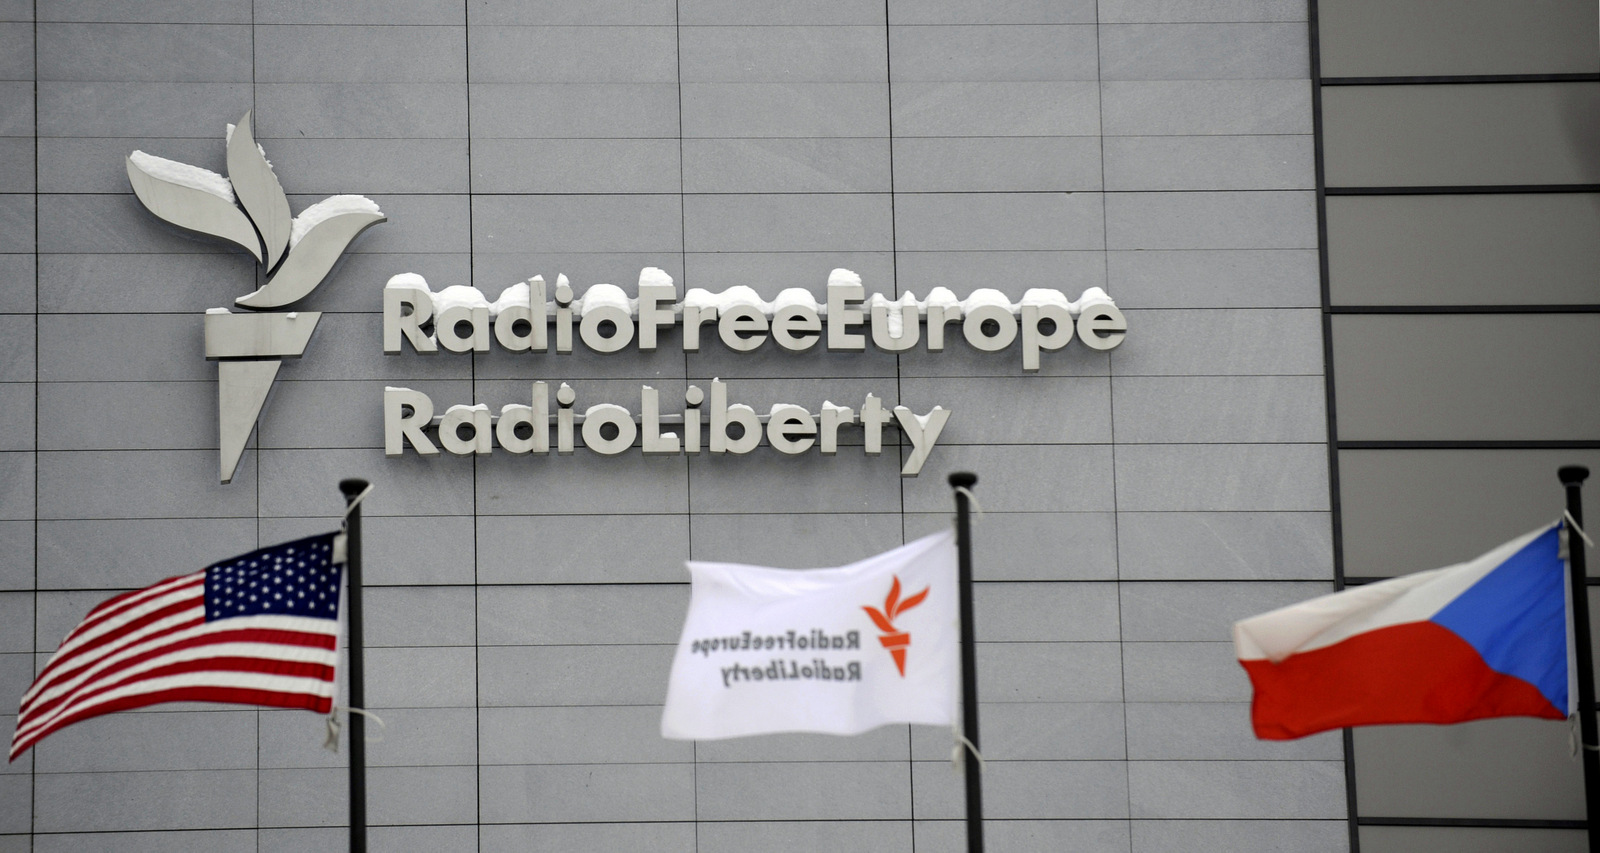 The headquarters of Radio Free Europe/Radio Liberty (RFE/RL) seen with the United States, RFE/RL and the Czech Republic flags in the foreground, in Prague Friday, Jan. 15, 2010. (AP/CTK, Michal Kamaryt)